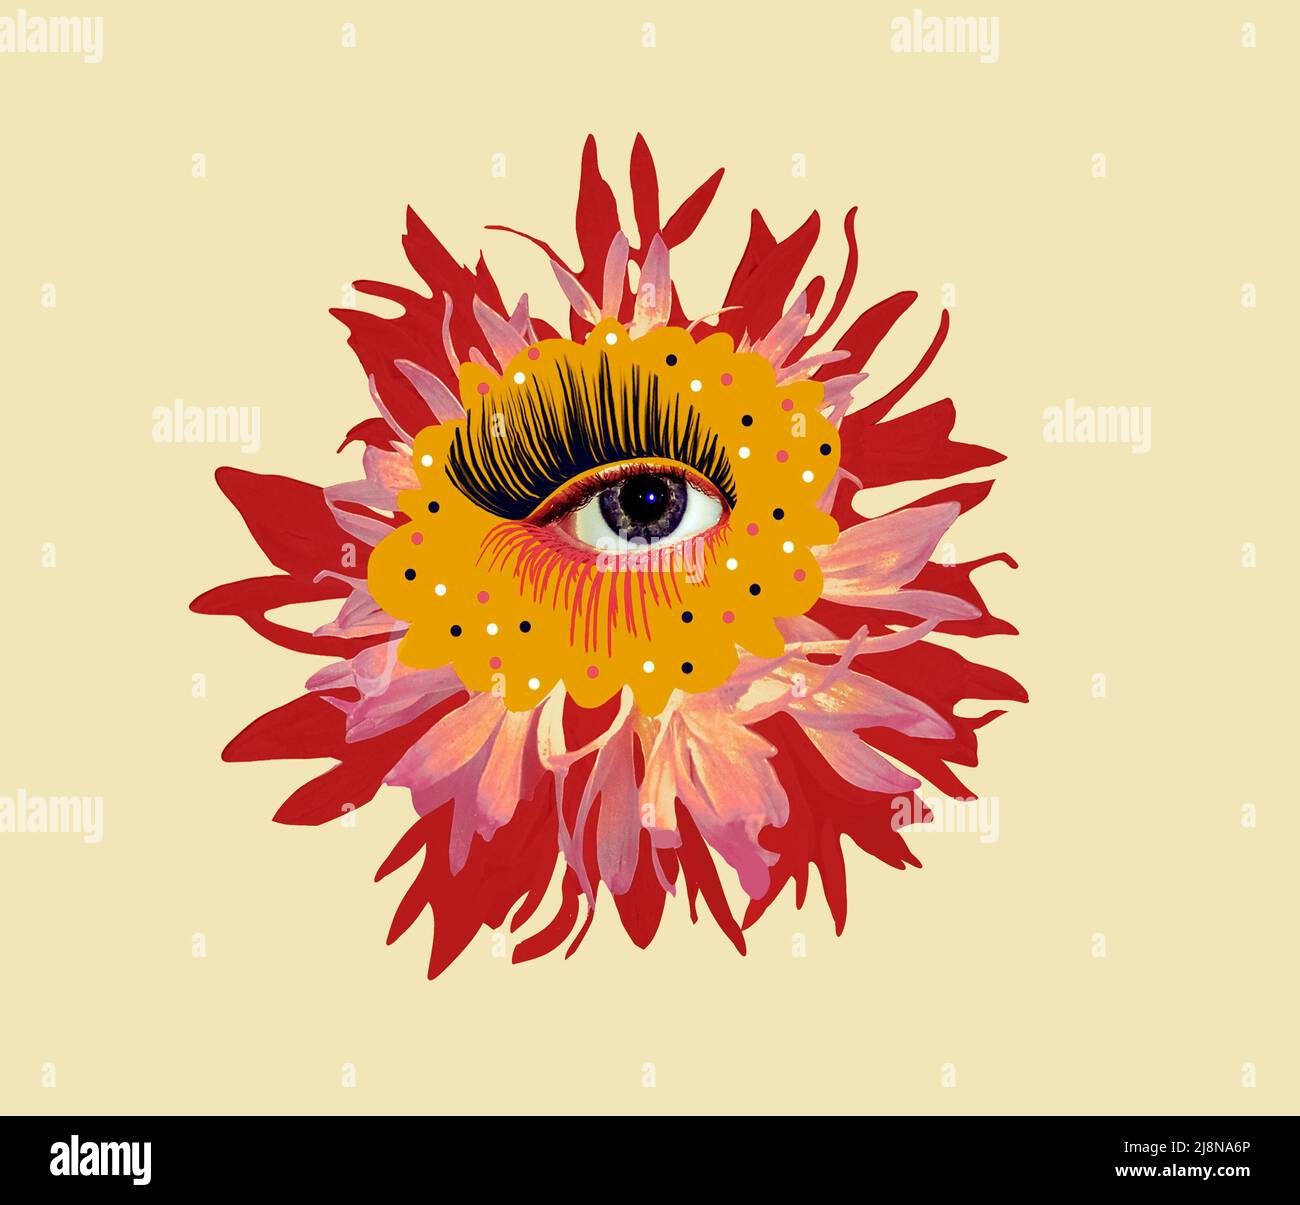 Contemporary art design. Eyeball in flower. Modern conceptual art poster with with beautiful eye in a mas surrealism style. Stock Photo